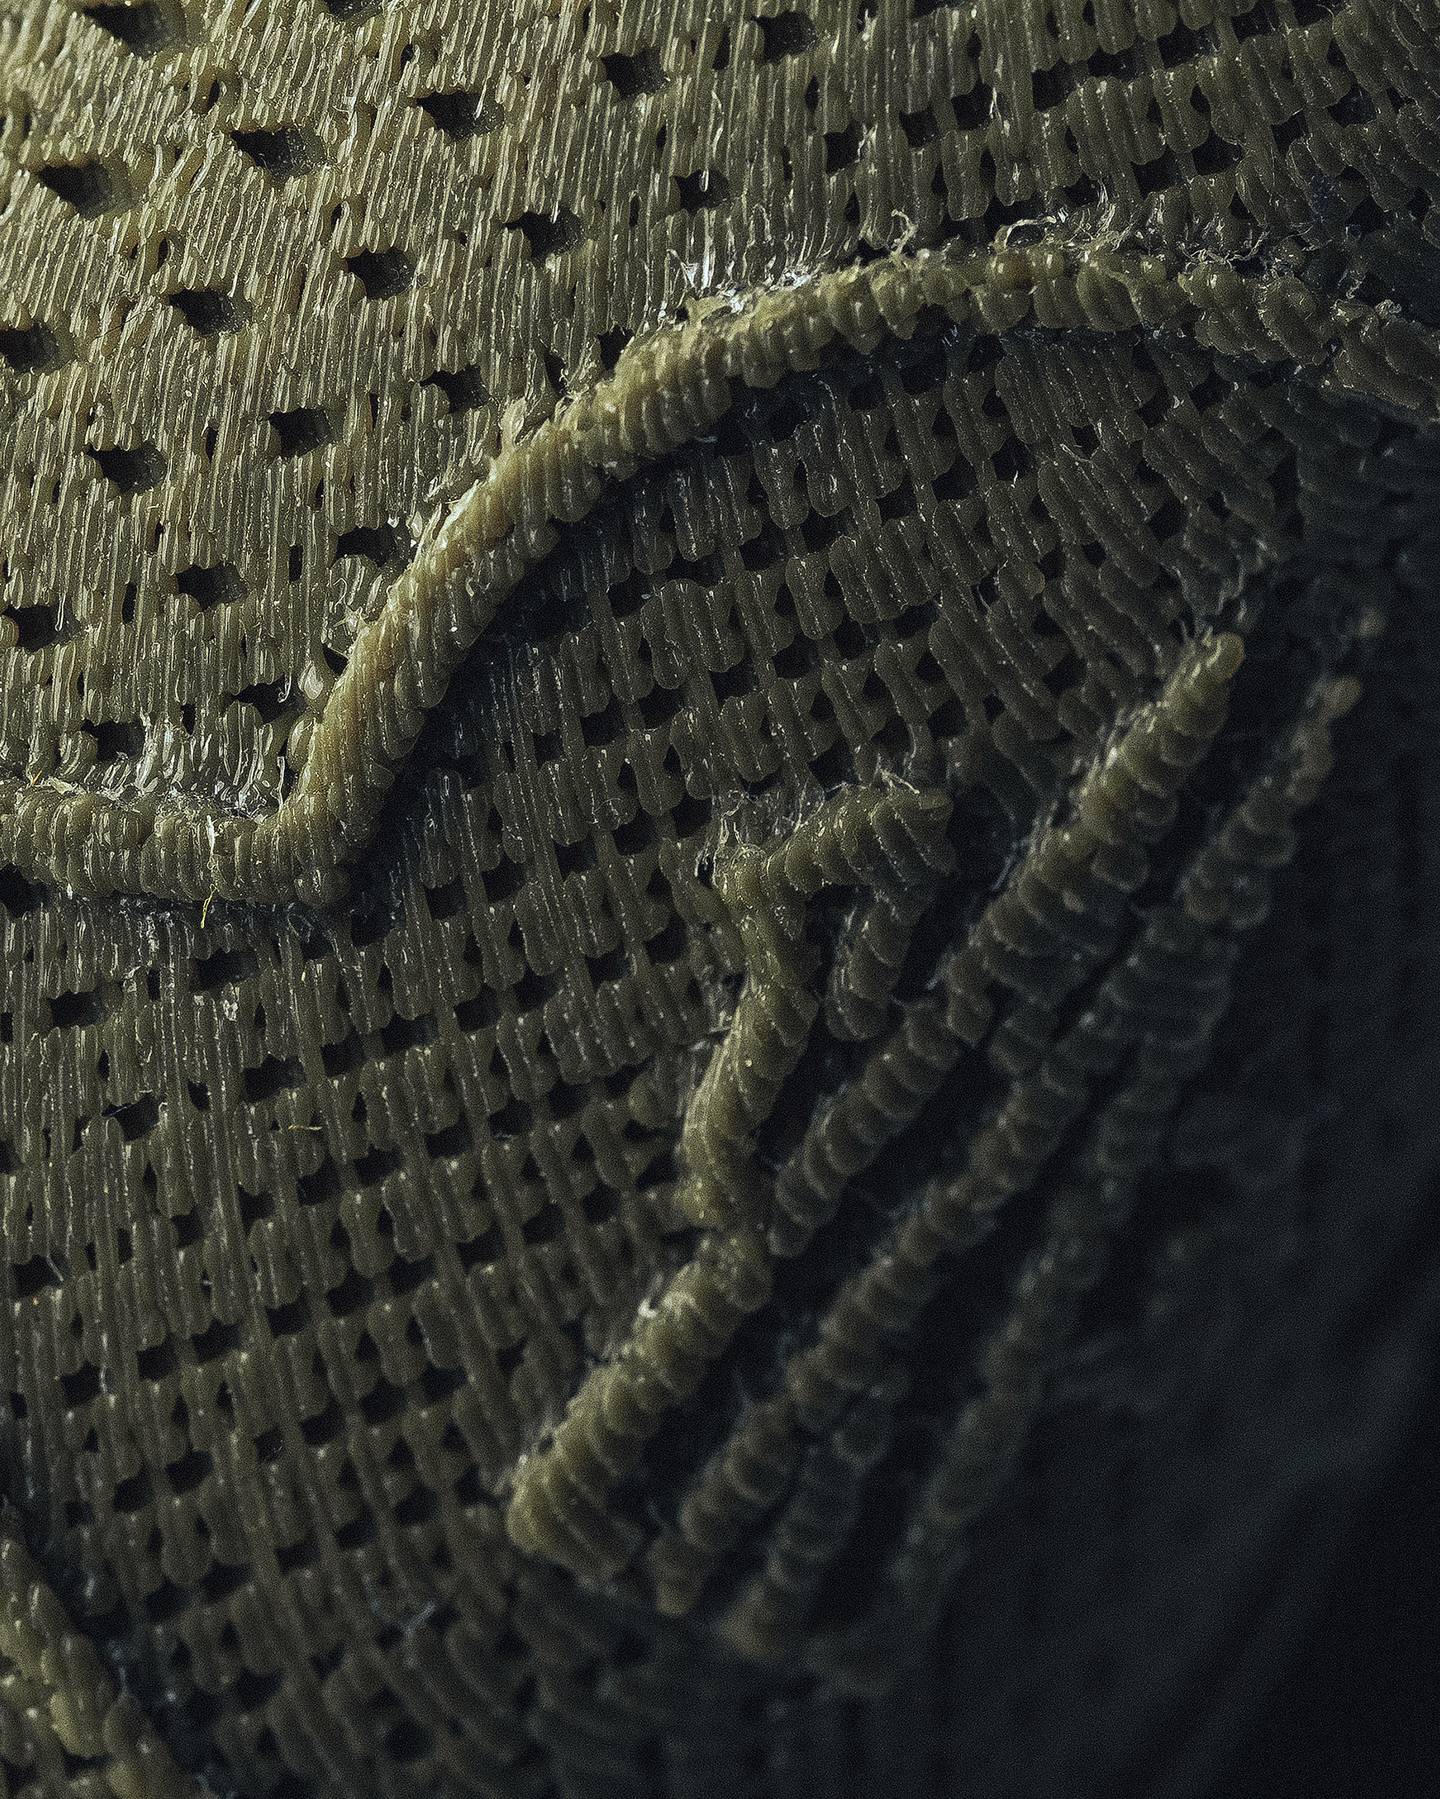 A close-up shot shows the texture of the 3D-printed material.